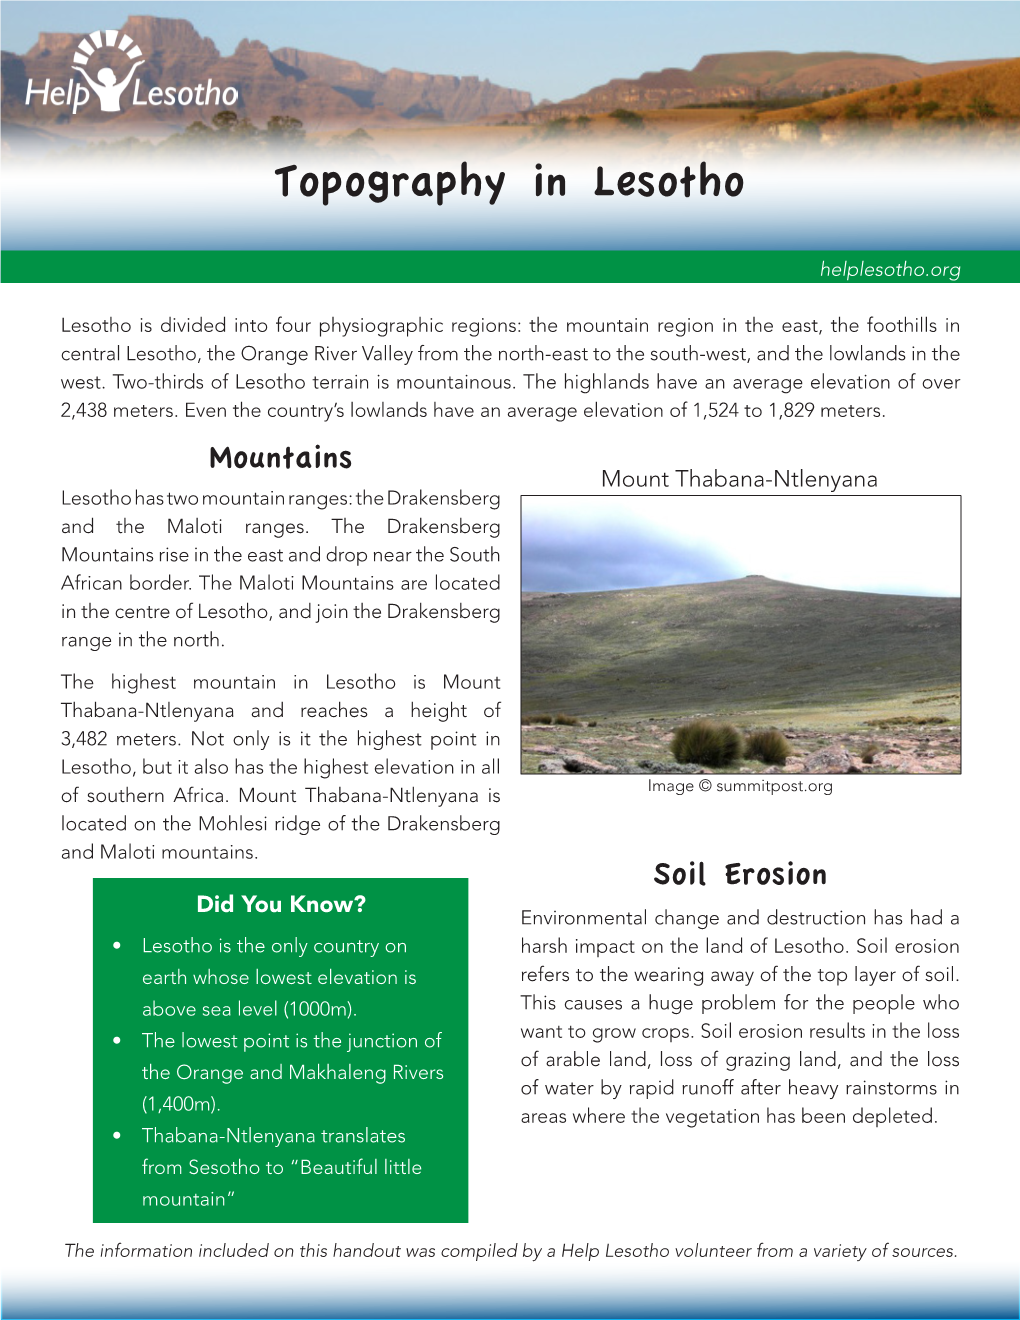 Topography in Lesotho